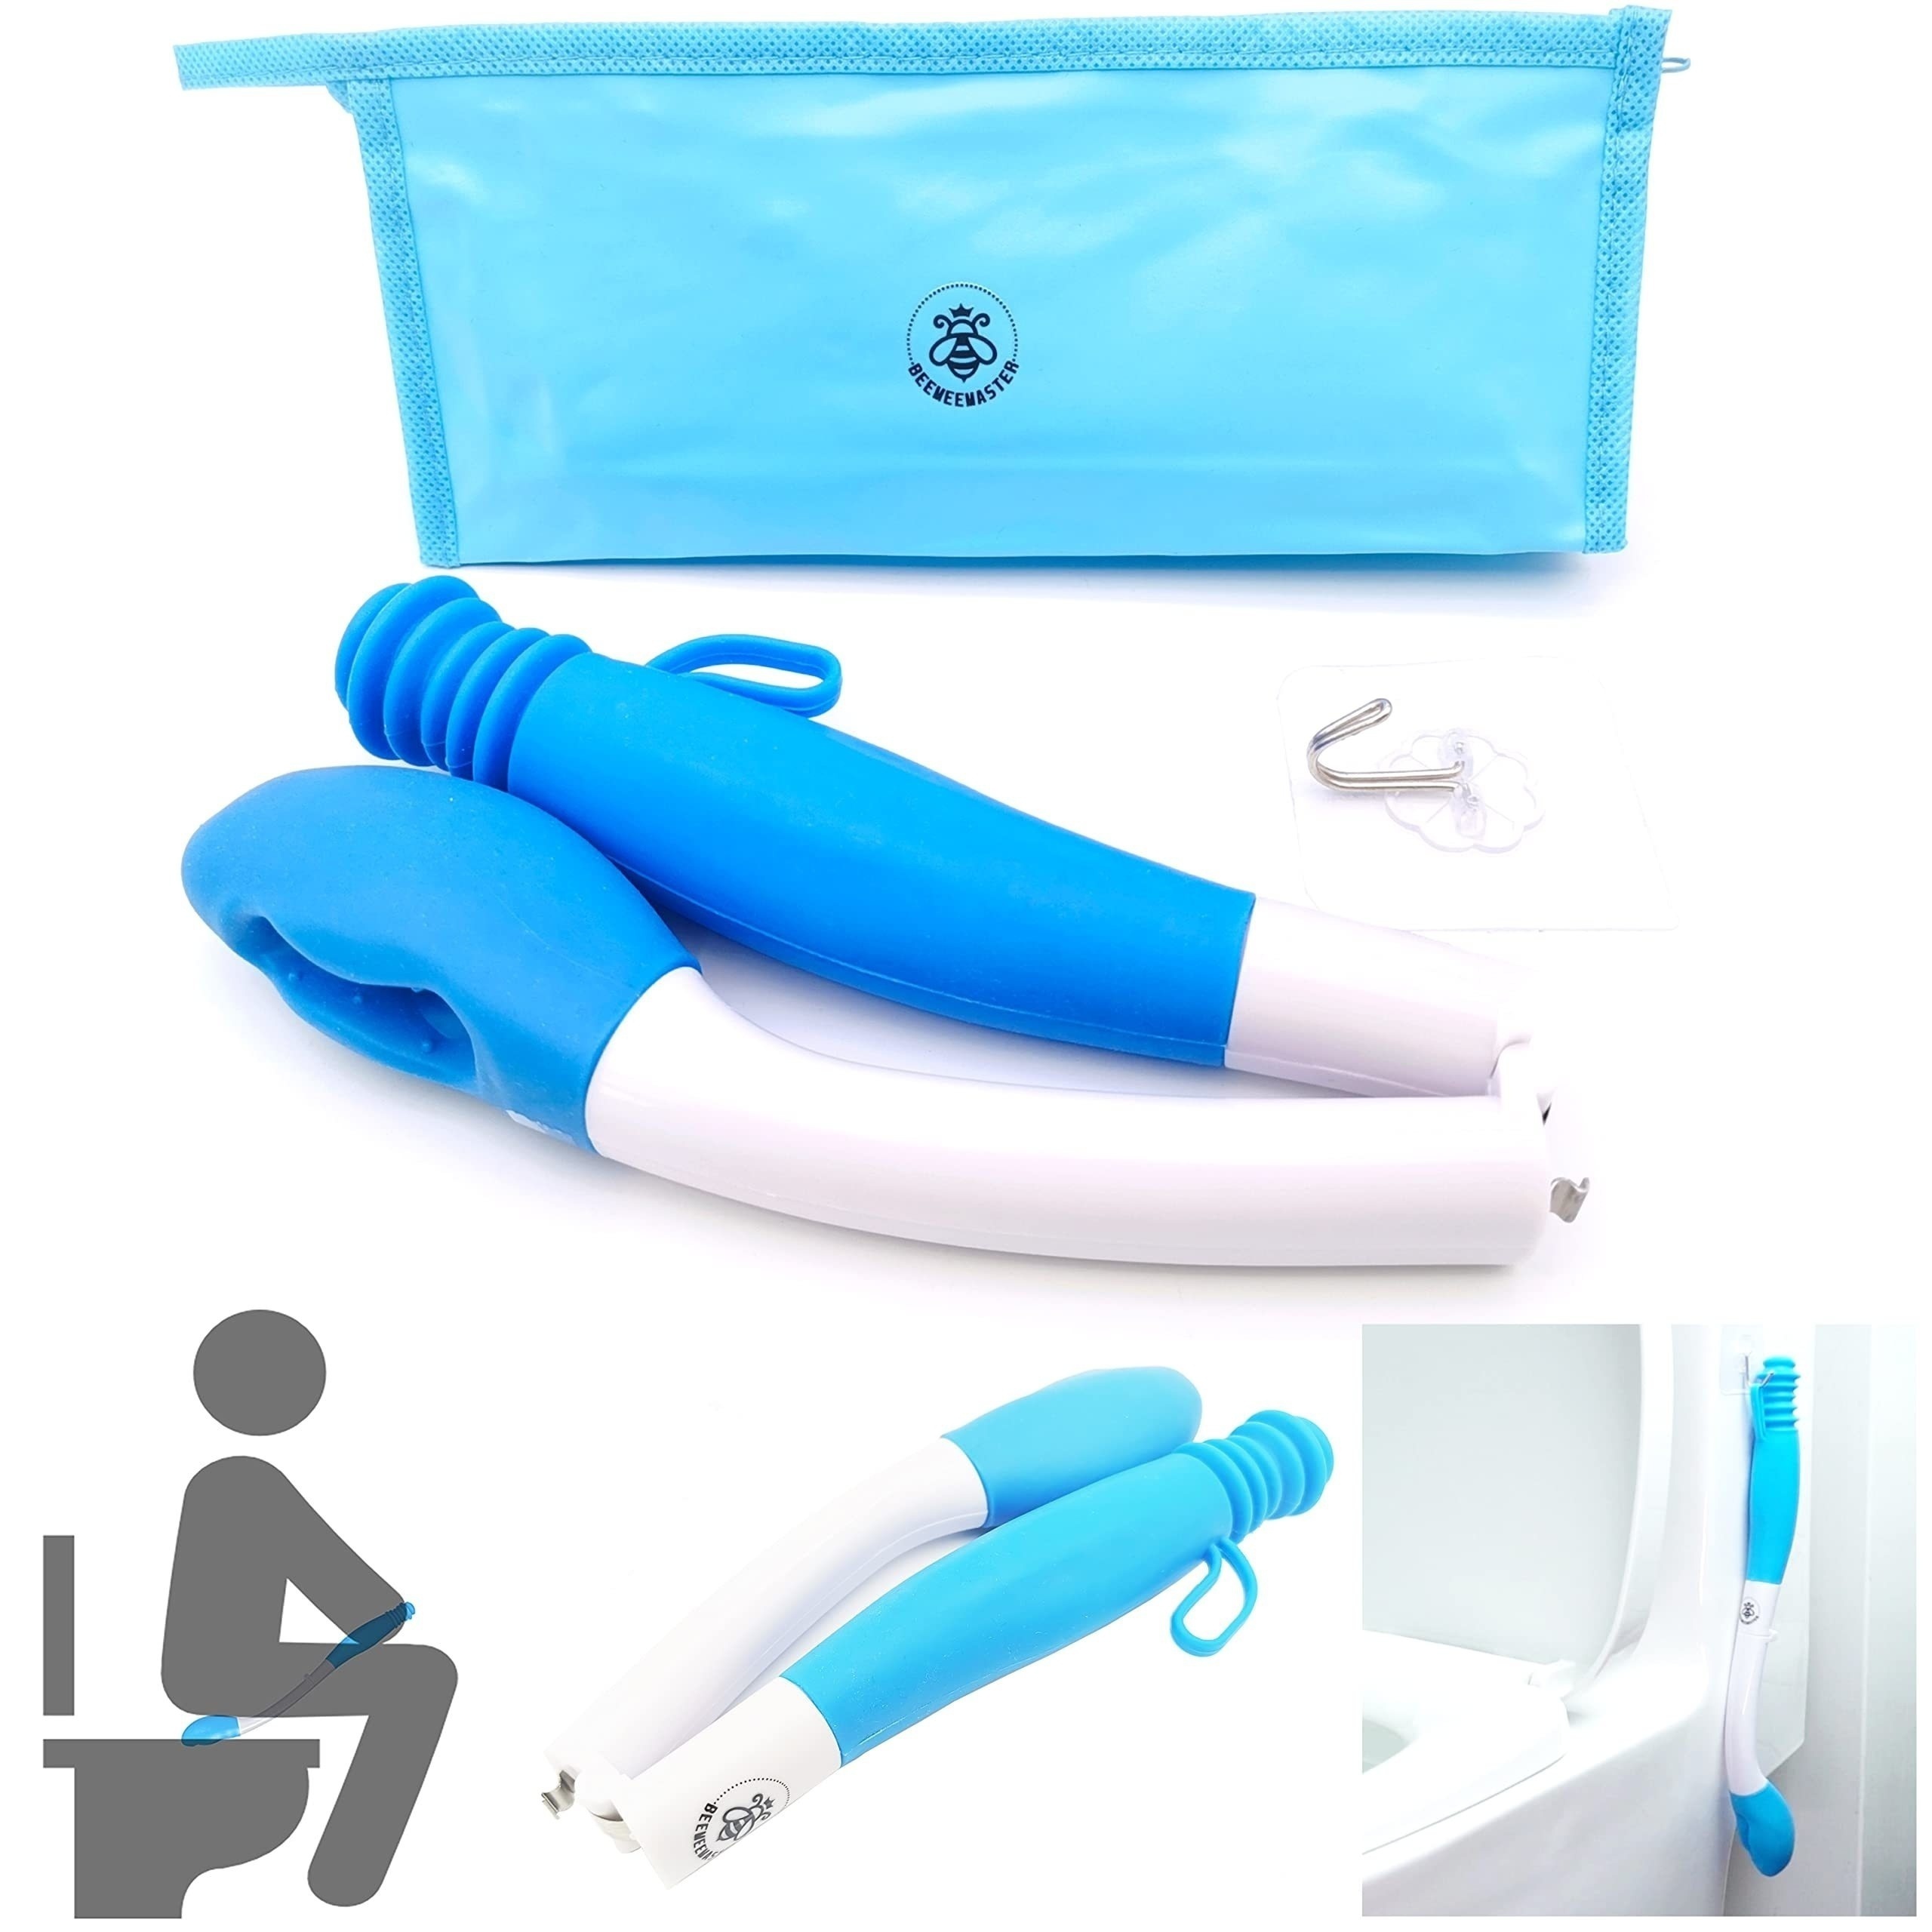 

Foldable Long Reach Comfort Wet Tissue Wipe Aid Handle Portable Toilet Paper Holder Toilet Tissue Aid Butt Wiper Holders For Disabled/unable Wipe